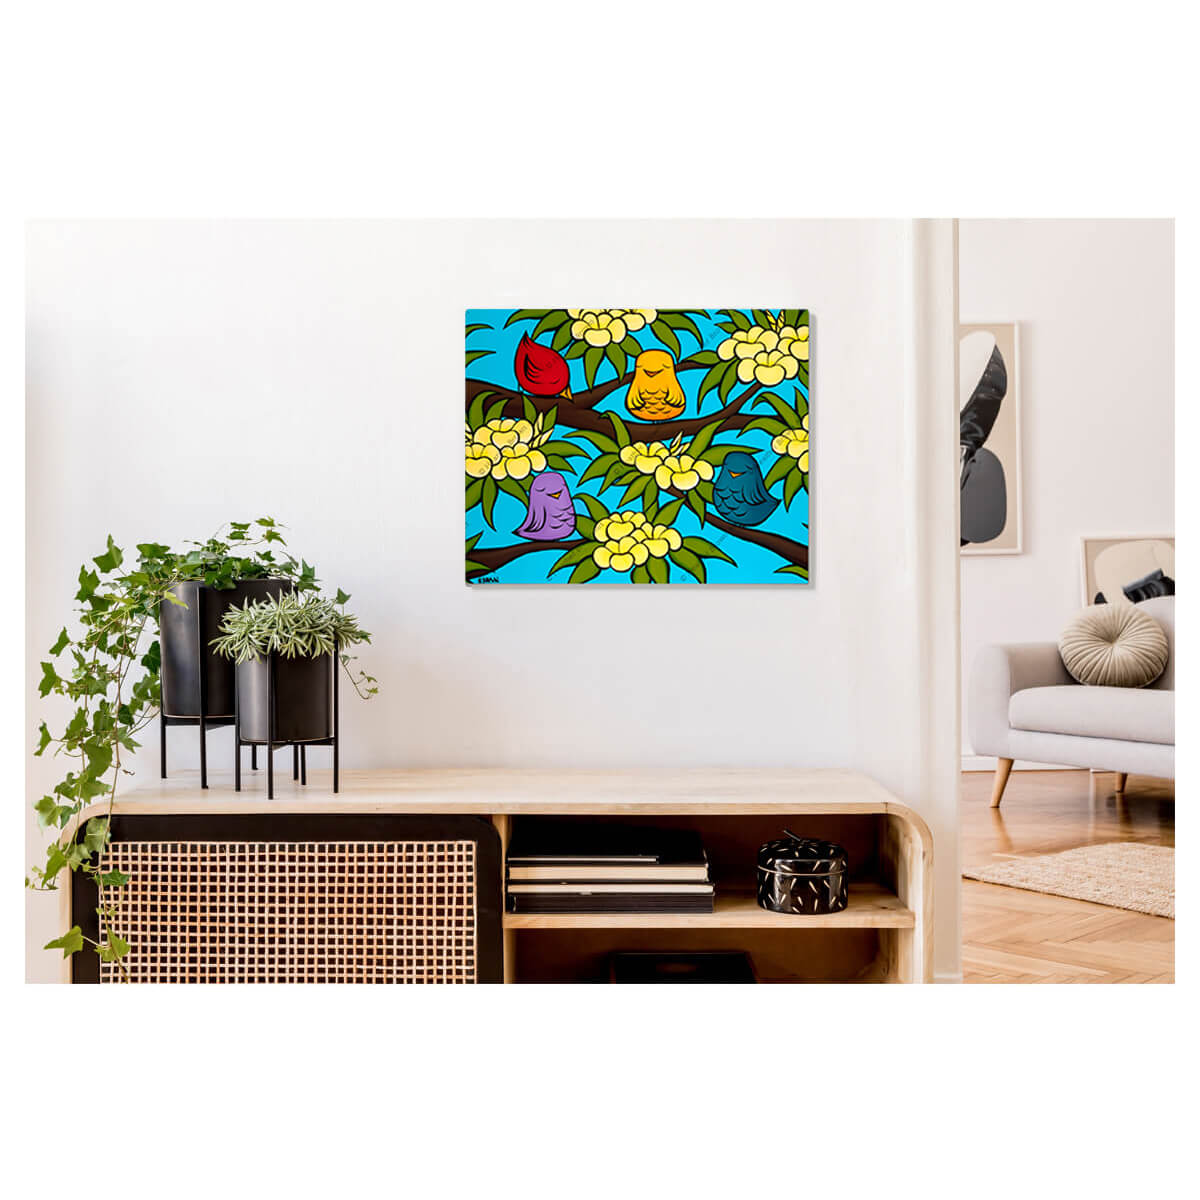 A metal art print featuring joyous and colorful birds sitting amongst fragrant yellow plumeria branches on a warm sunny day by Hawaii surf artist Heather Brown